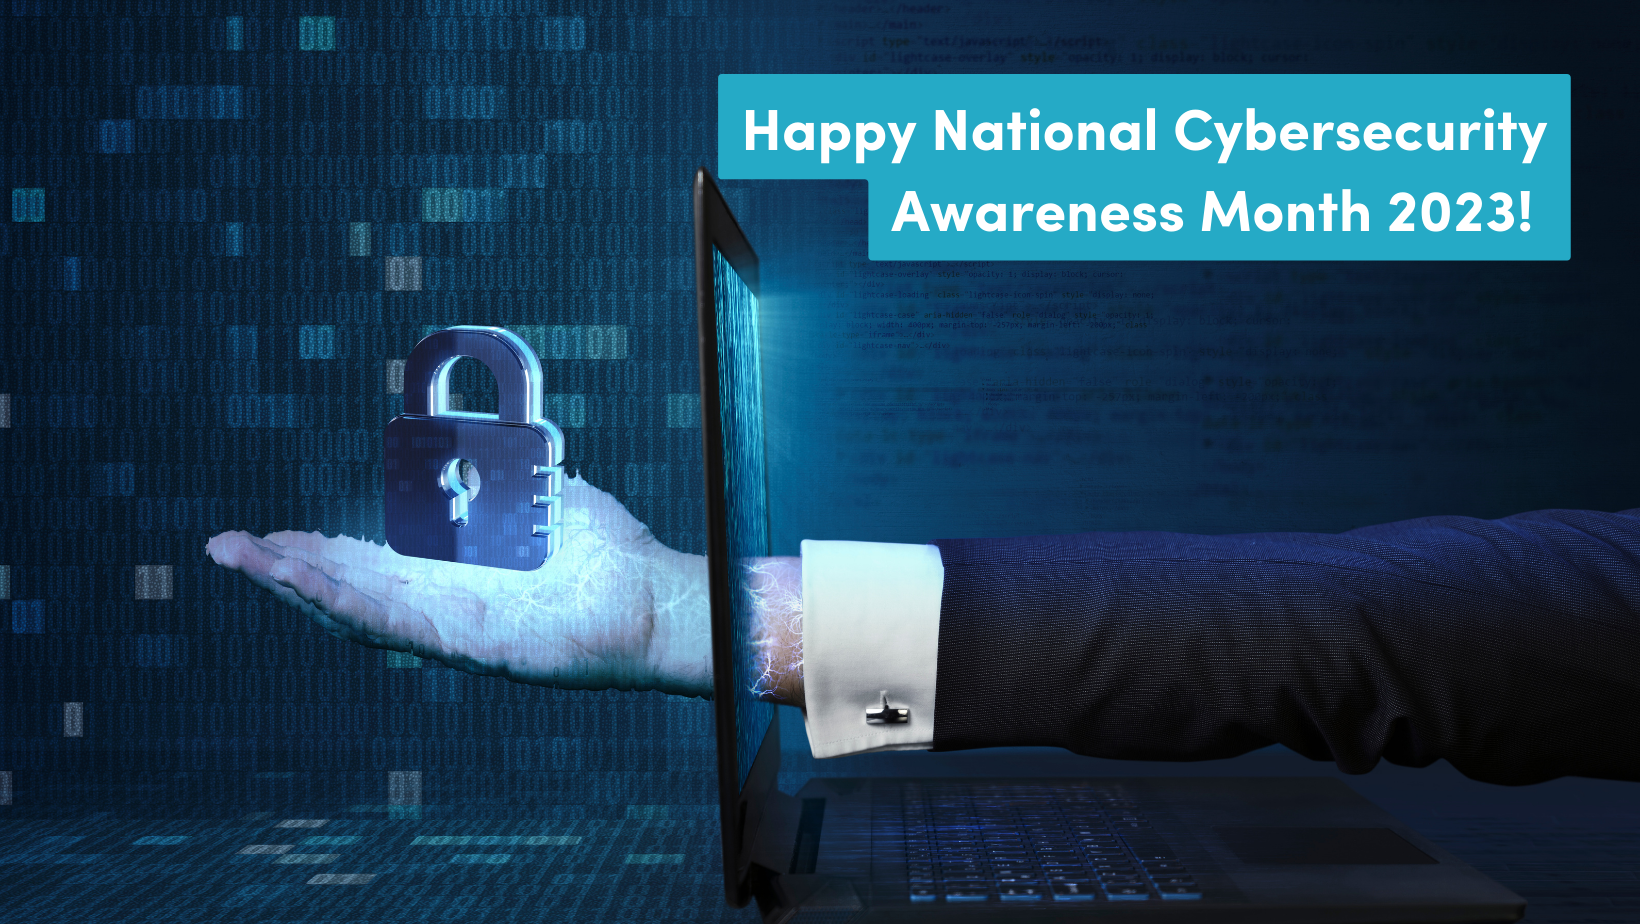 Featured image: Cybersecurity on computer - Cybersecurity Awareness Month: Strengthening Your Digital Defence